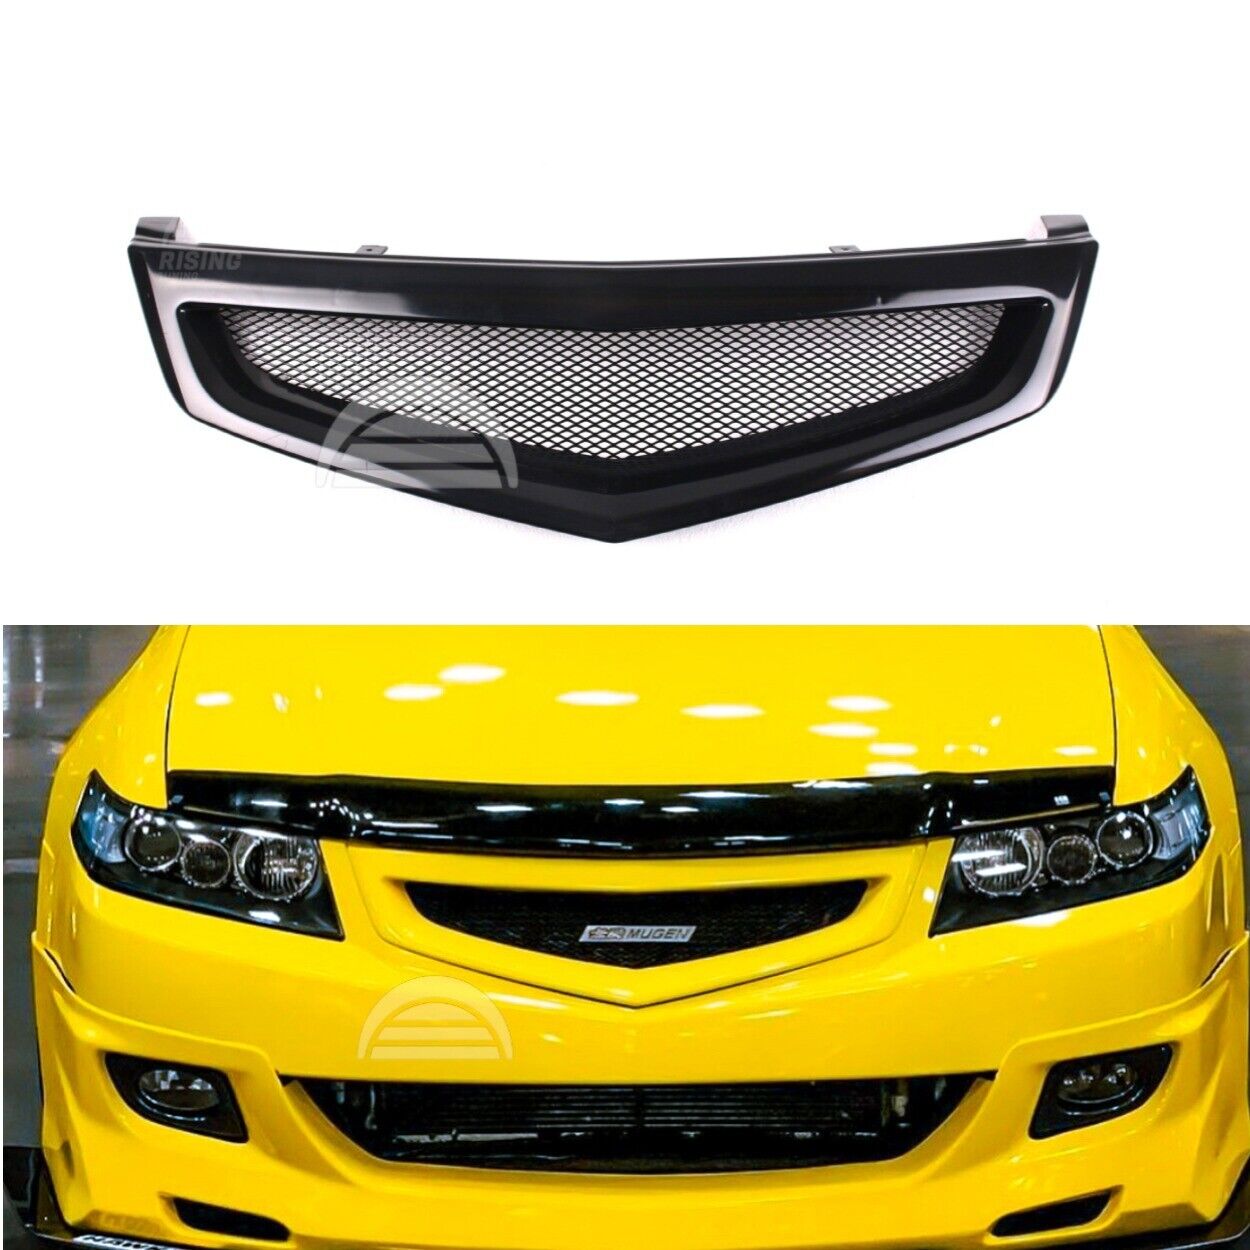 Grille Mugen for Acura TSX Honda Accord 7 2006-2008 CL7 JDM Front Mash Radiator